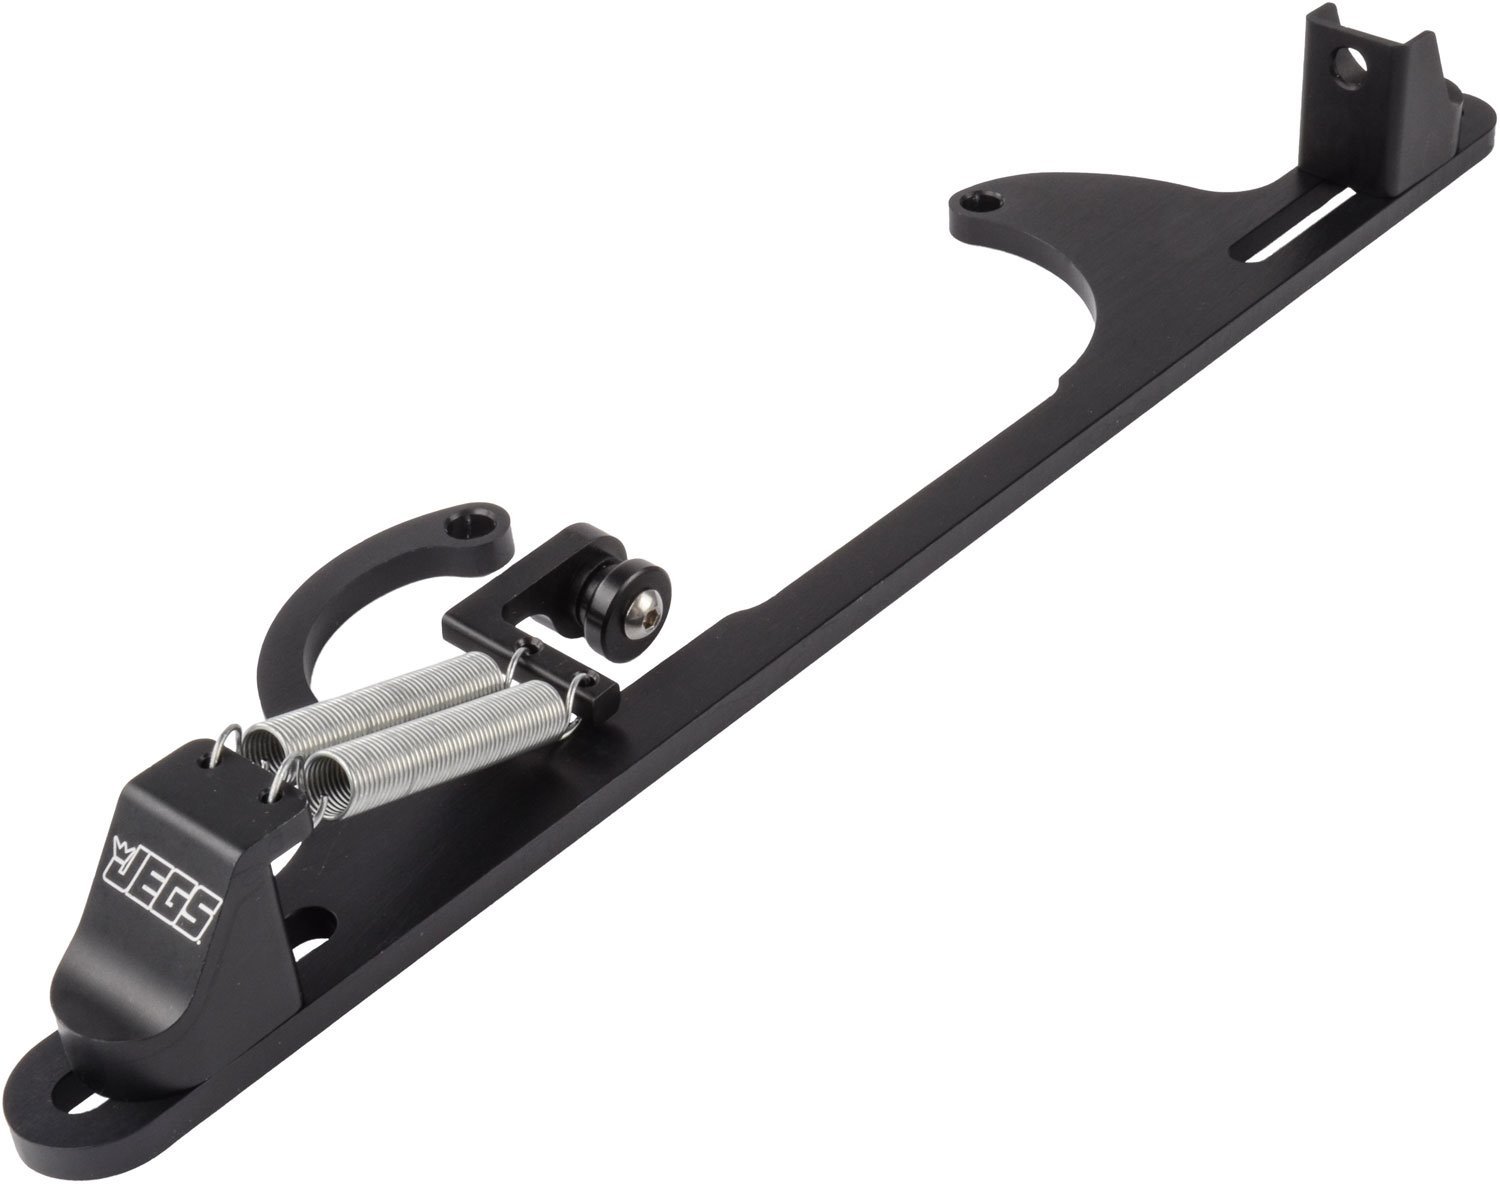 Throttle Bracket with Return Springs for JEGS and Lokar Style Cables [Black Anodized Finish]